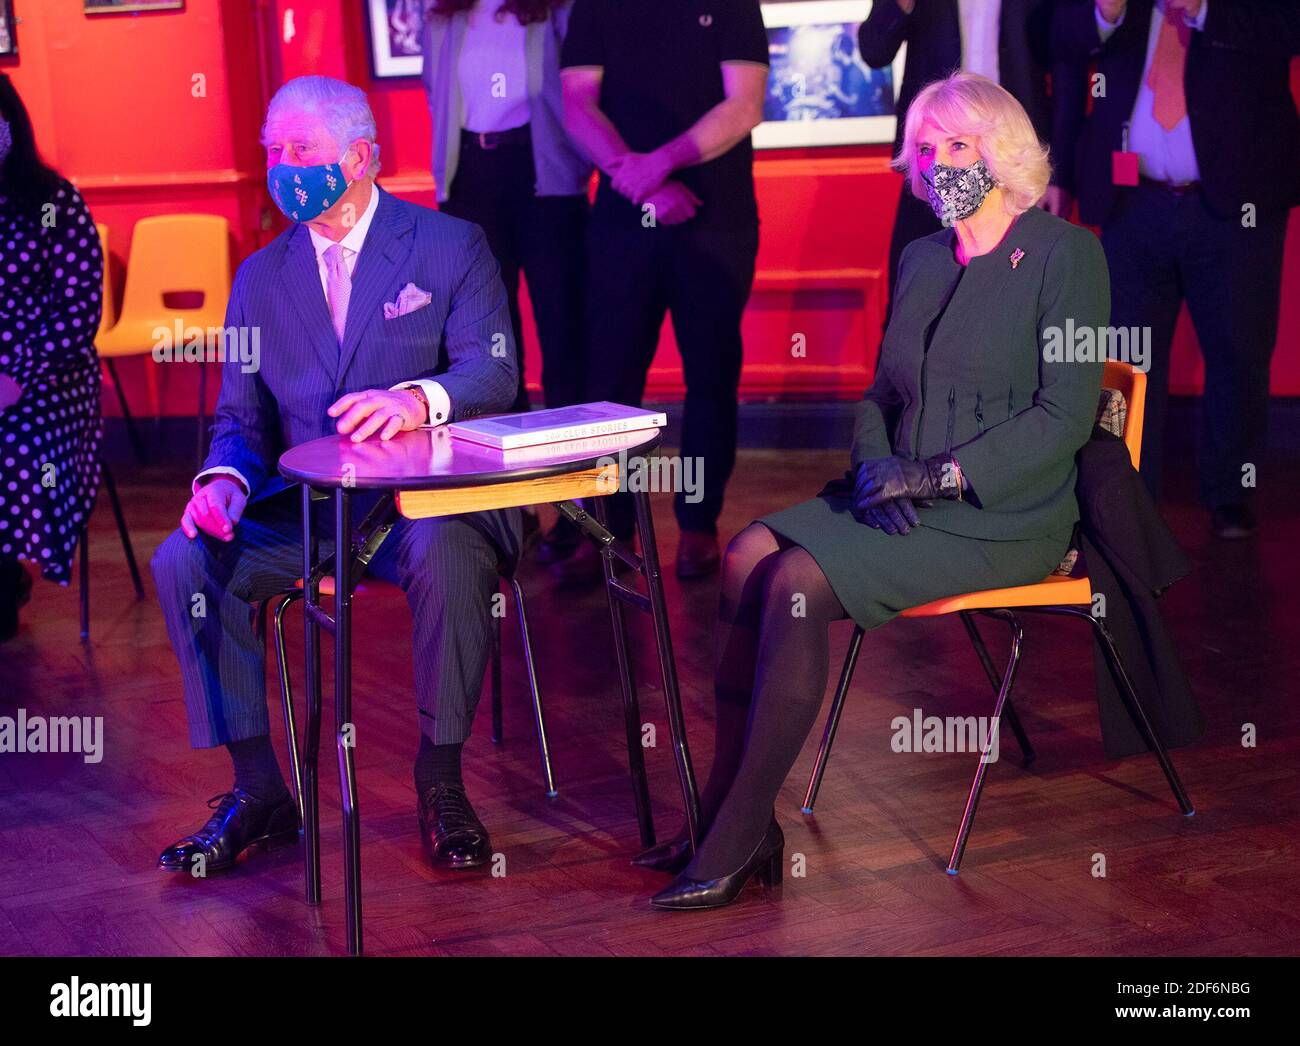 The Prince of Wales and Duchess of Cornwall watching a short musical performance by singer Emily Capell during a visit to the 100 Club nightclub in London. Stock Photo